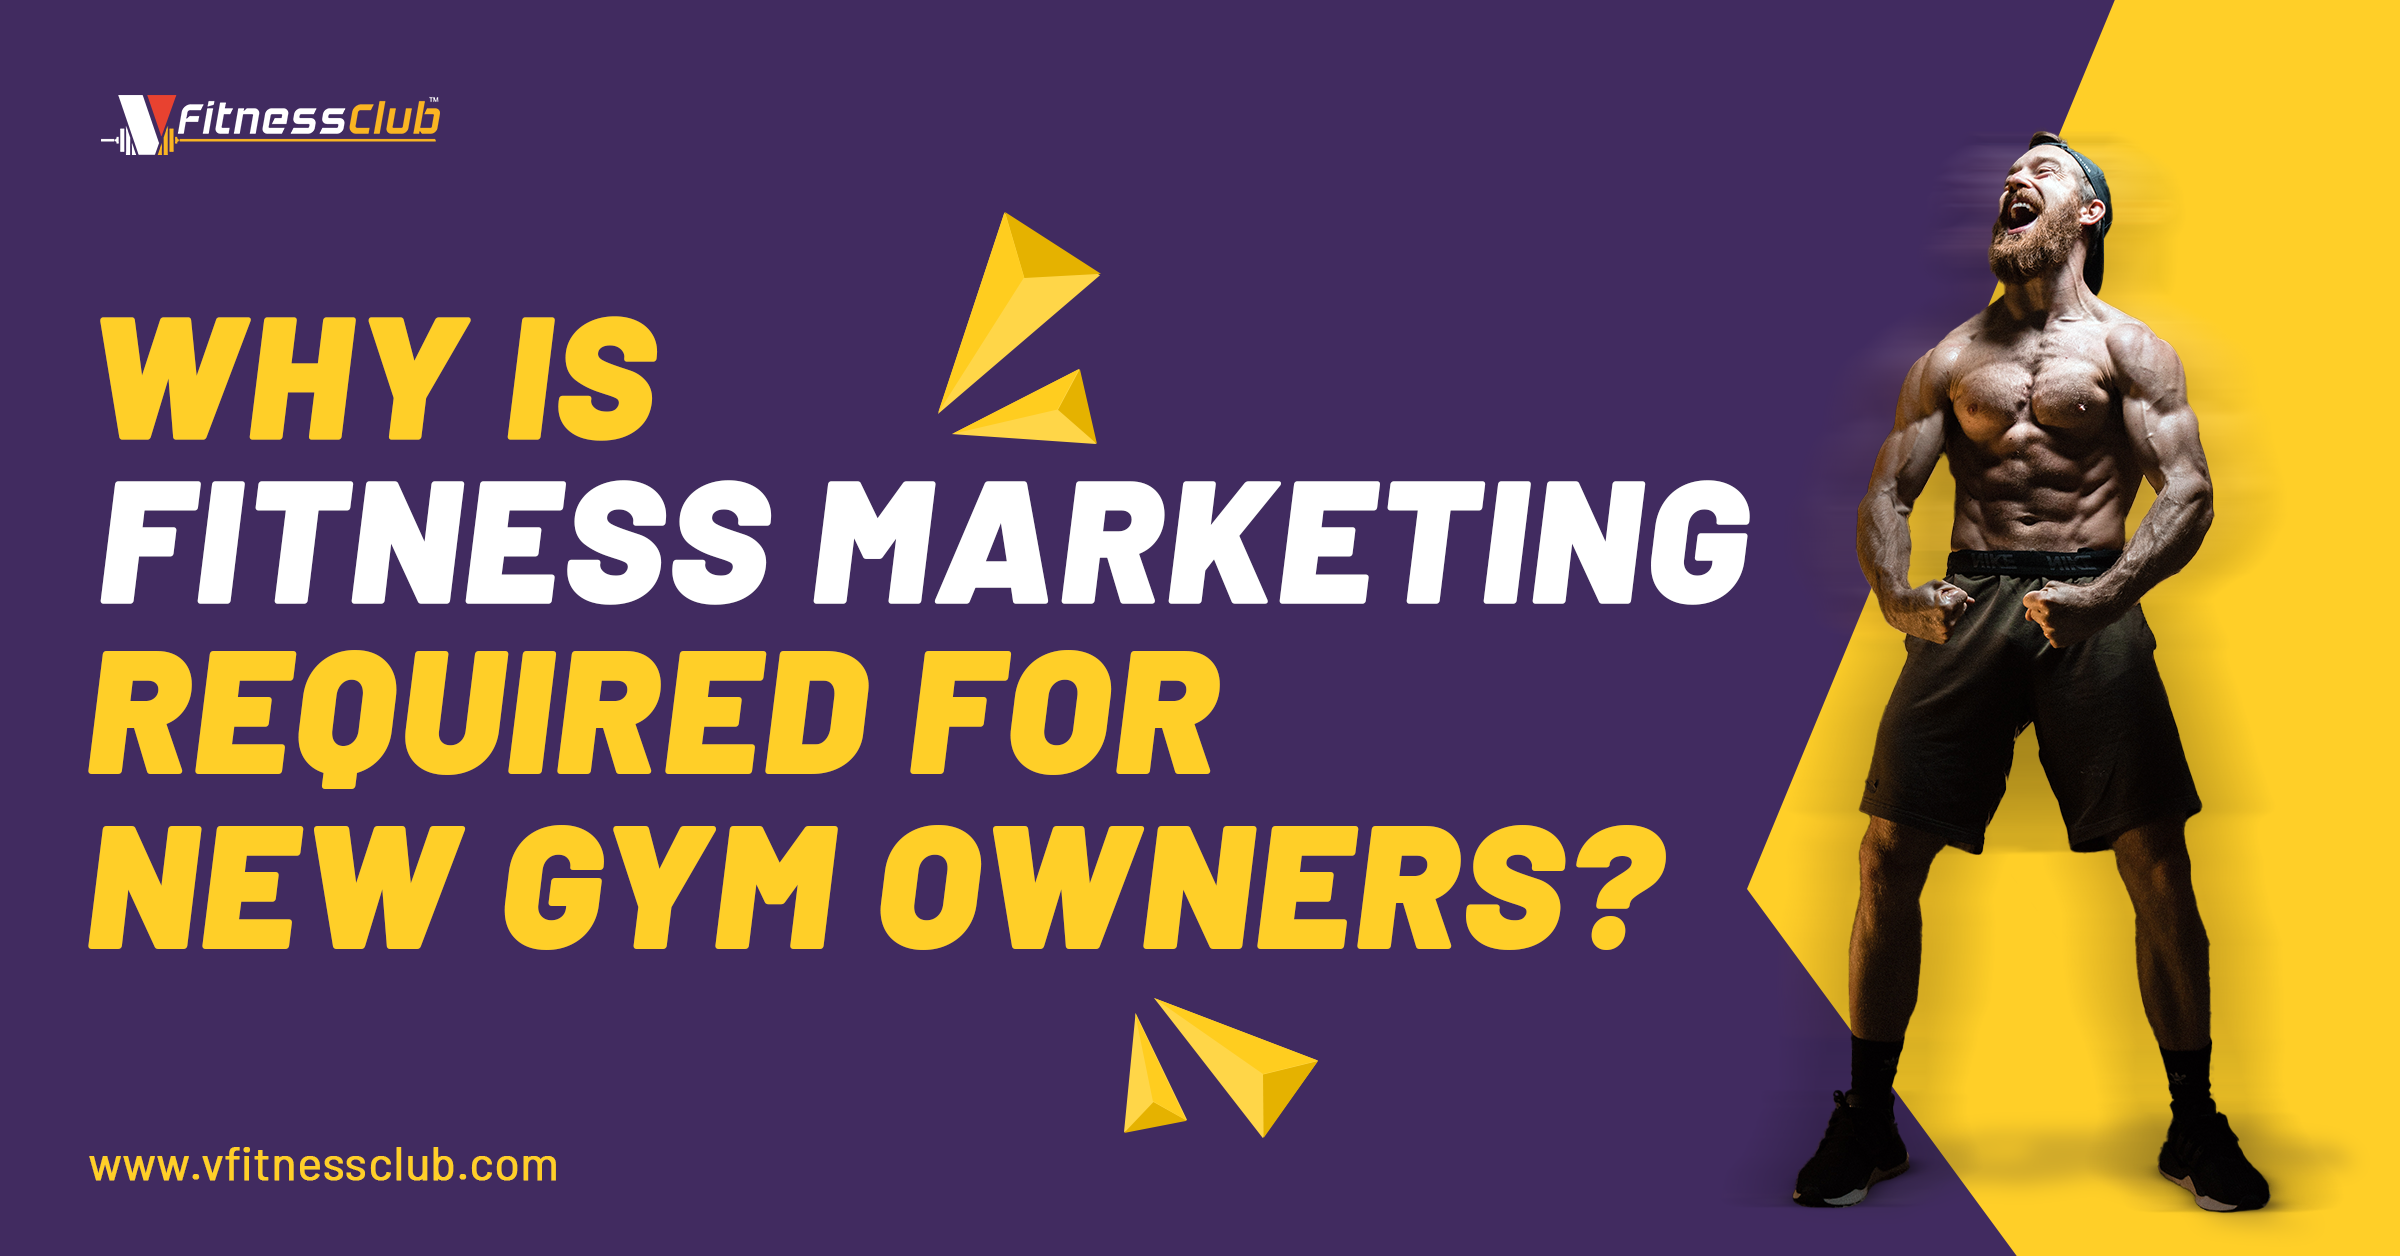 Why is Fitness Marketing Required for New Gym Owners?